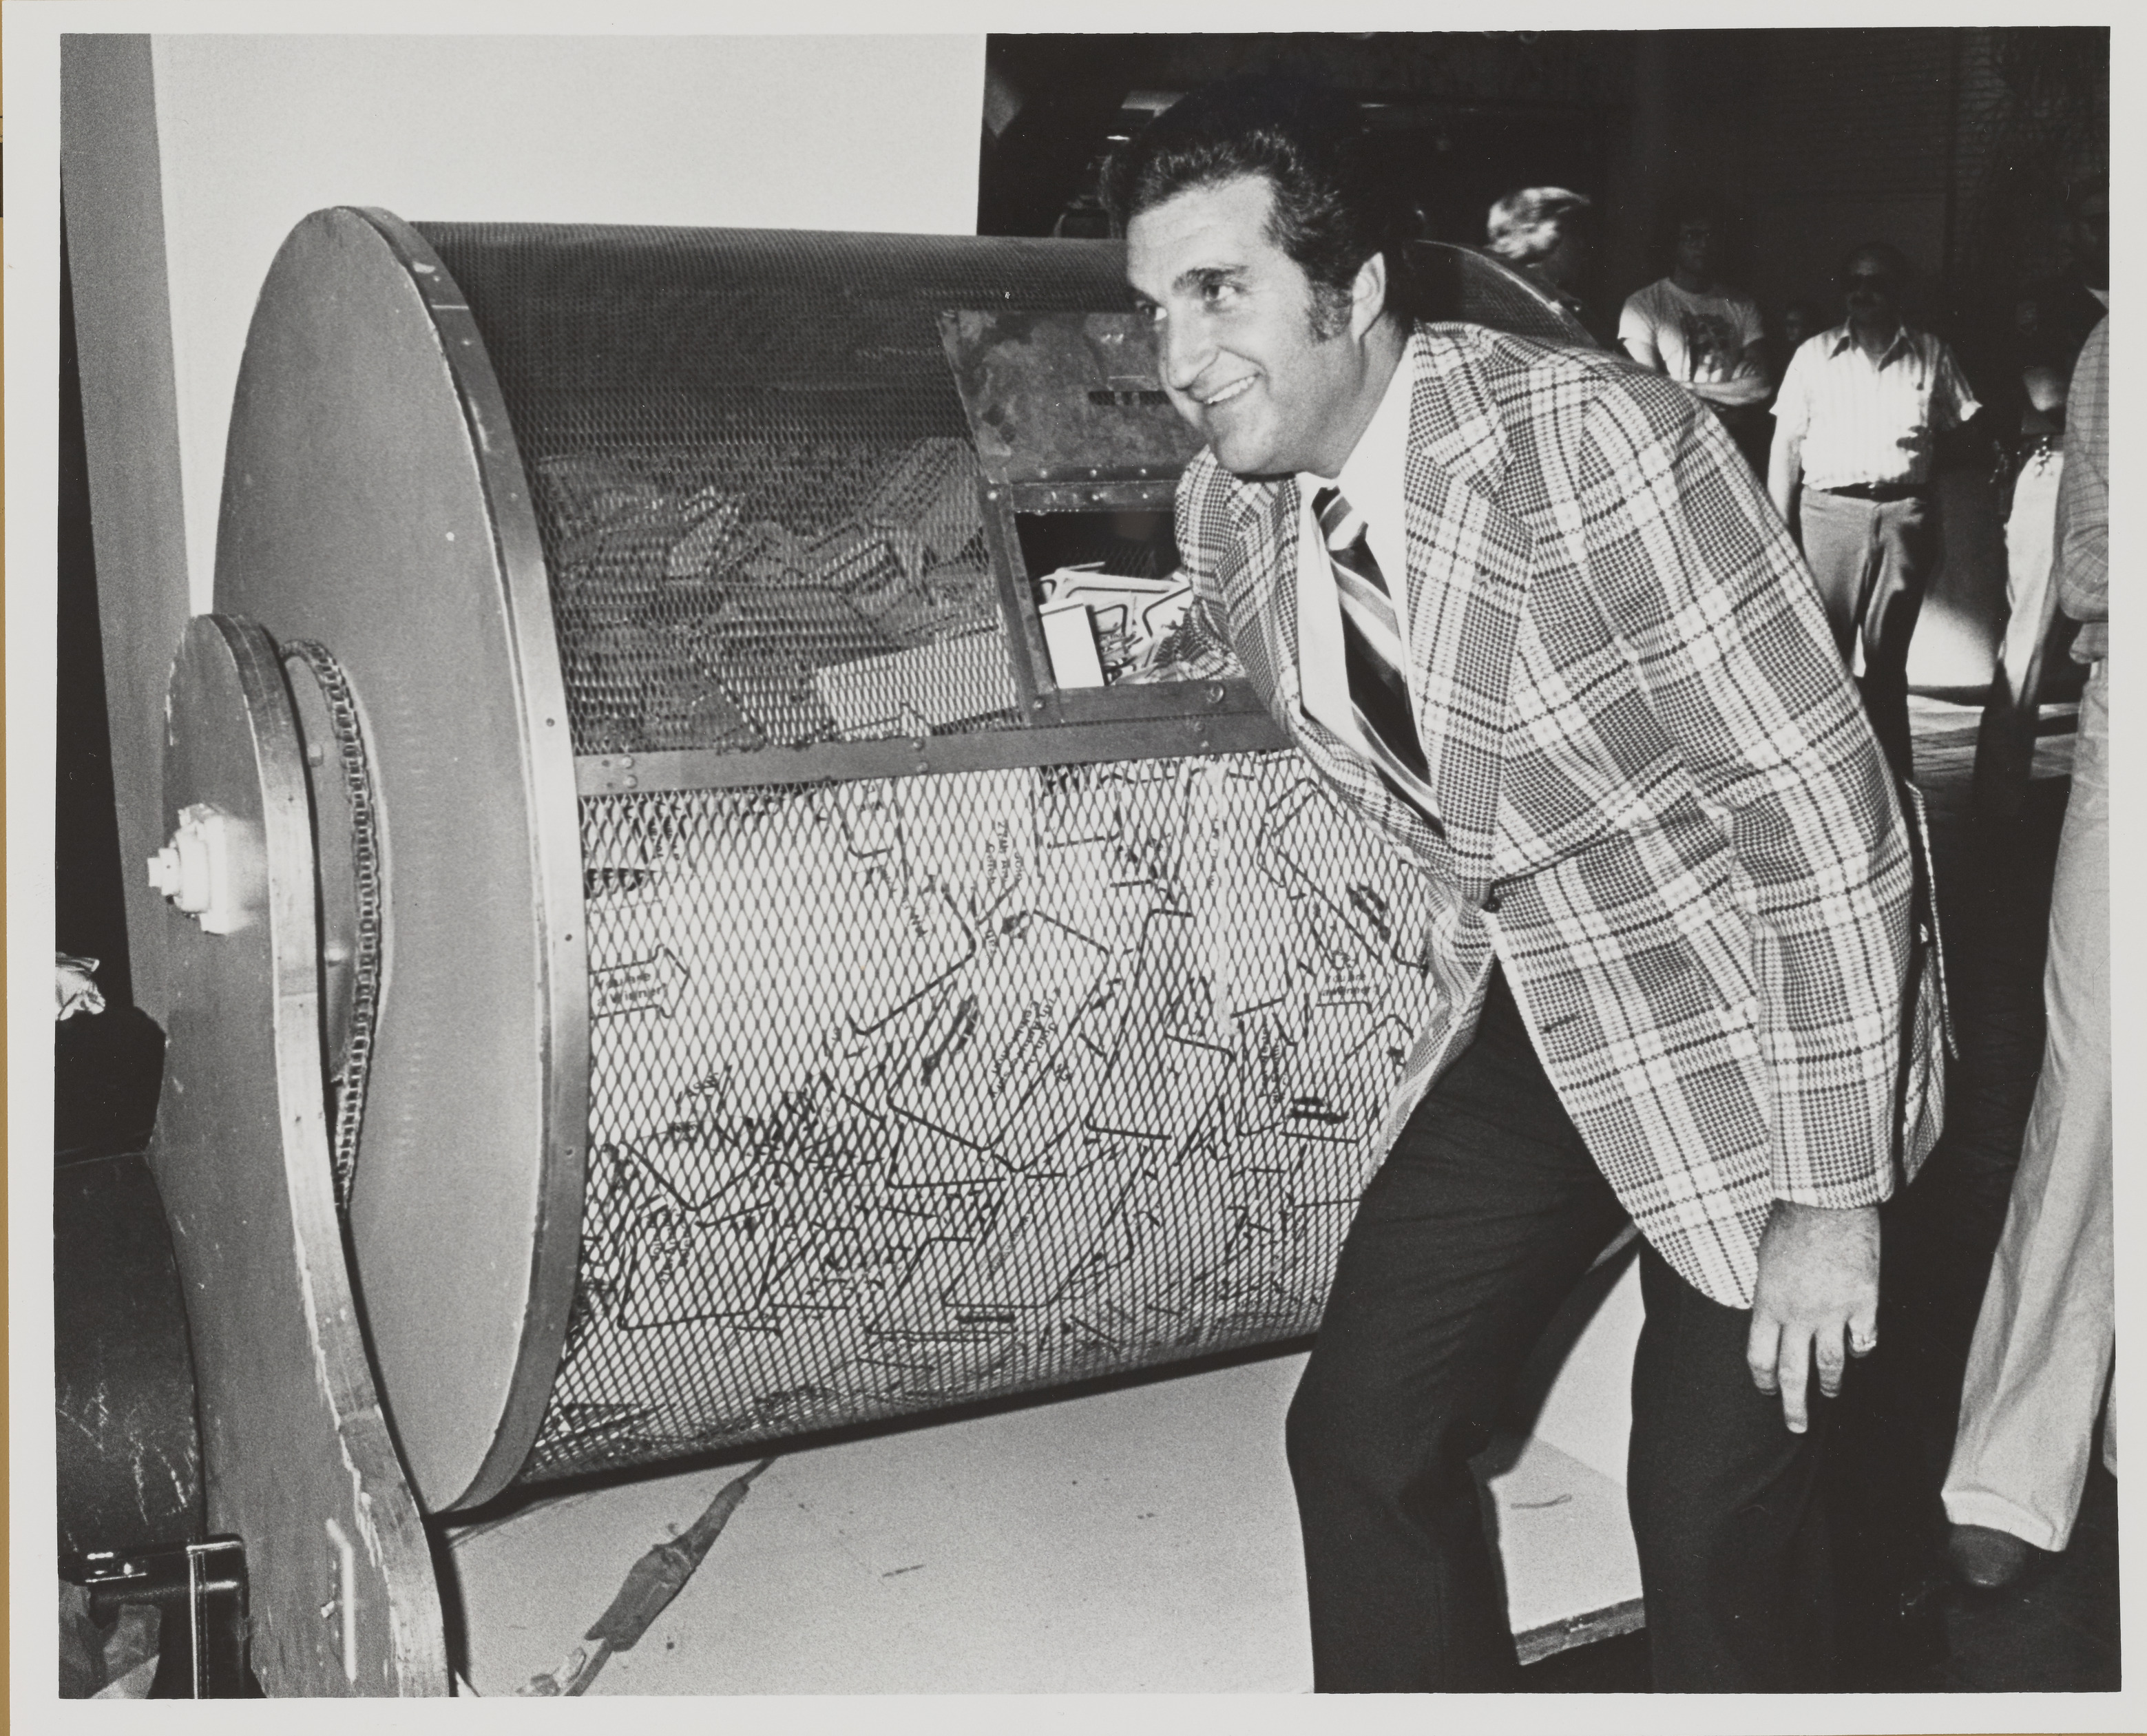 Photograph of Ron Lurie picking a winning ticket from barrel, 1979